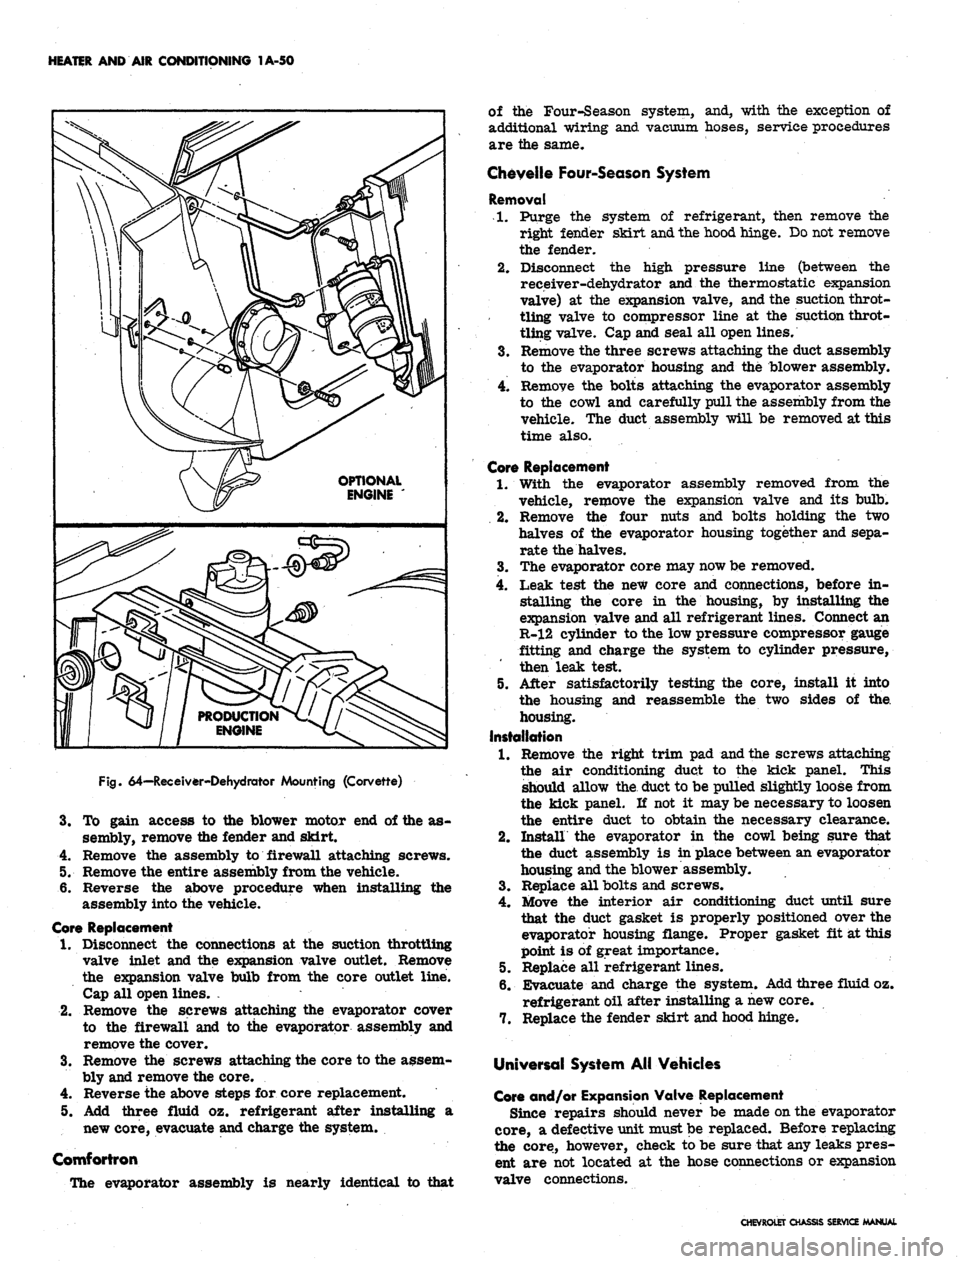 CHEVROLET CAMARO 1967 1.G Chassis Workshop Manual 
HEATER AND AIR CONDITIONING 1A-50

Fig.
 64—Receiver-Dehydrator Mounting (Corvette)

3.

4.

5.

6. 
To gain access to the blower motor end of the as-

sembly, remove the fender and skirt.

Remove 